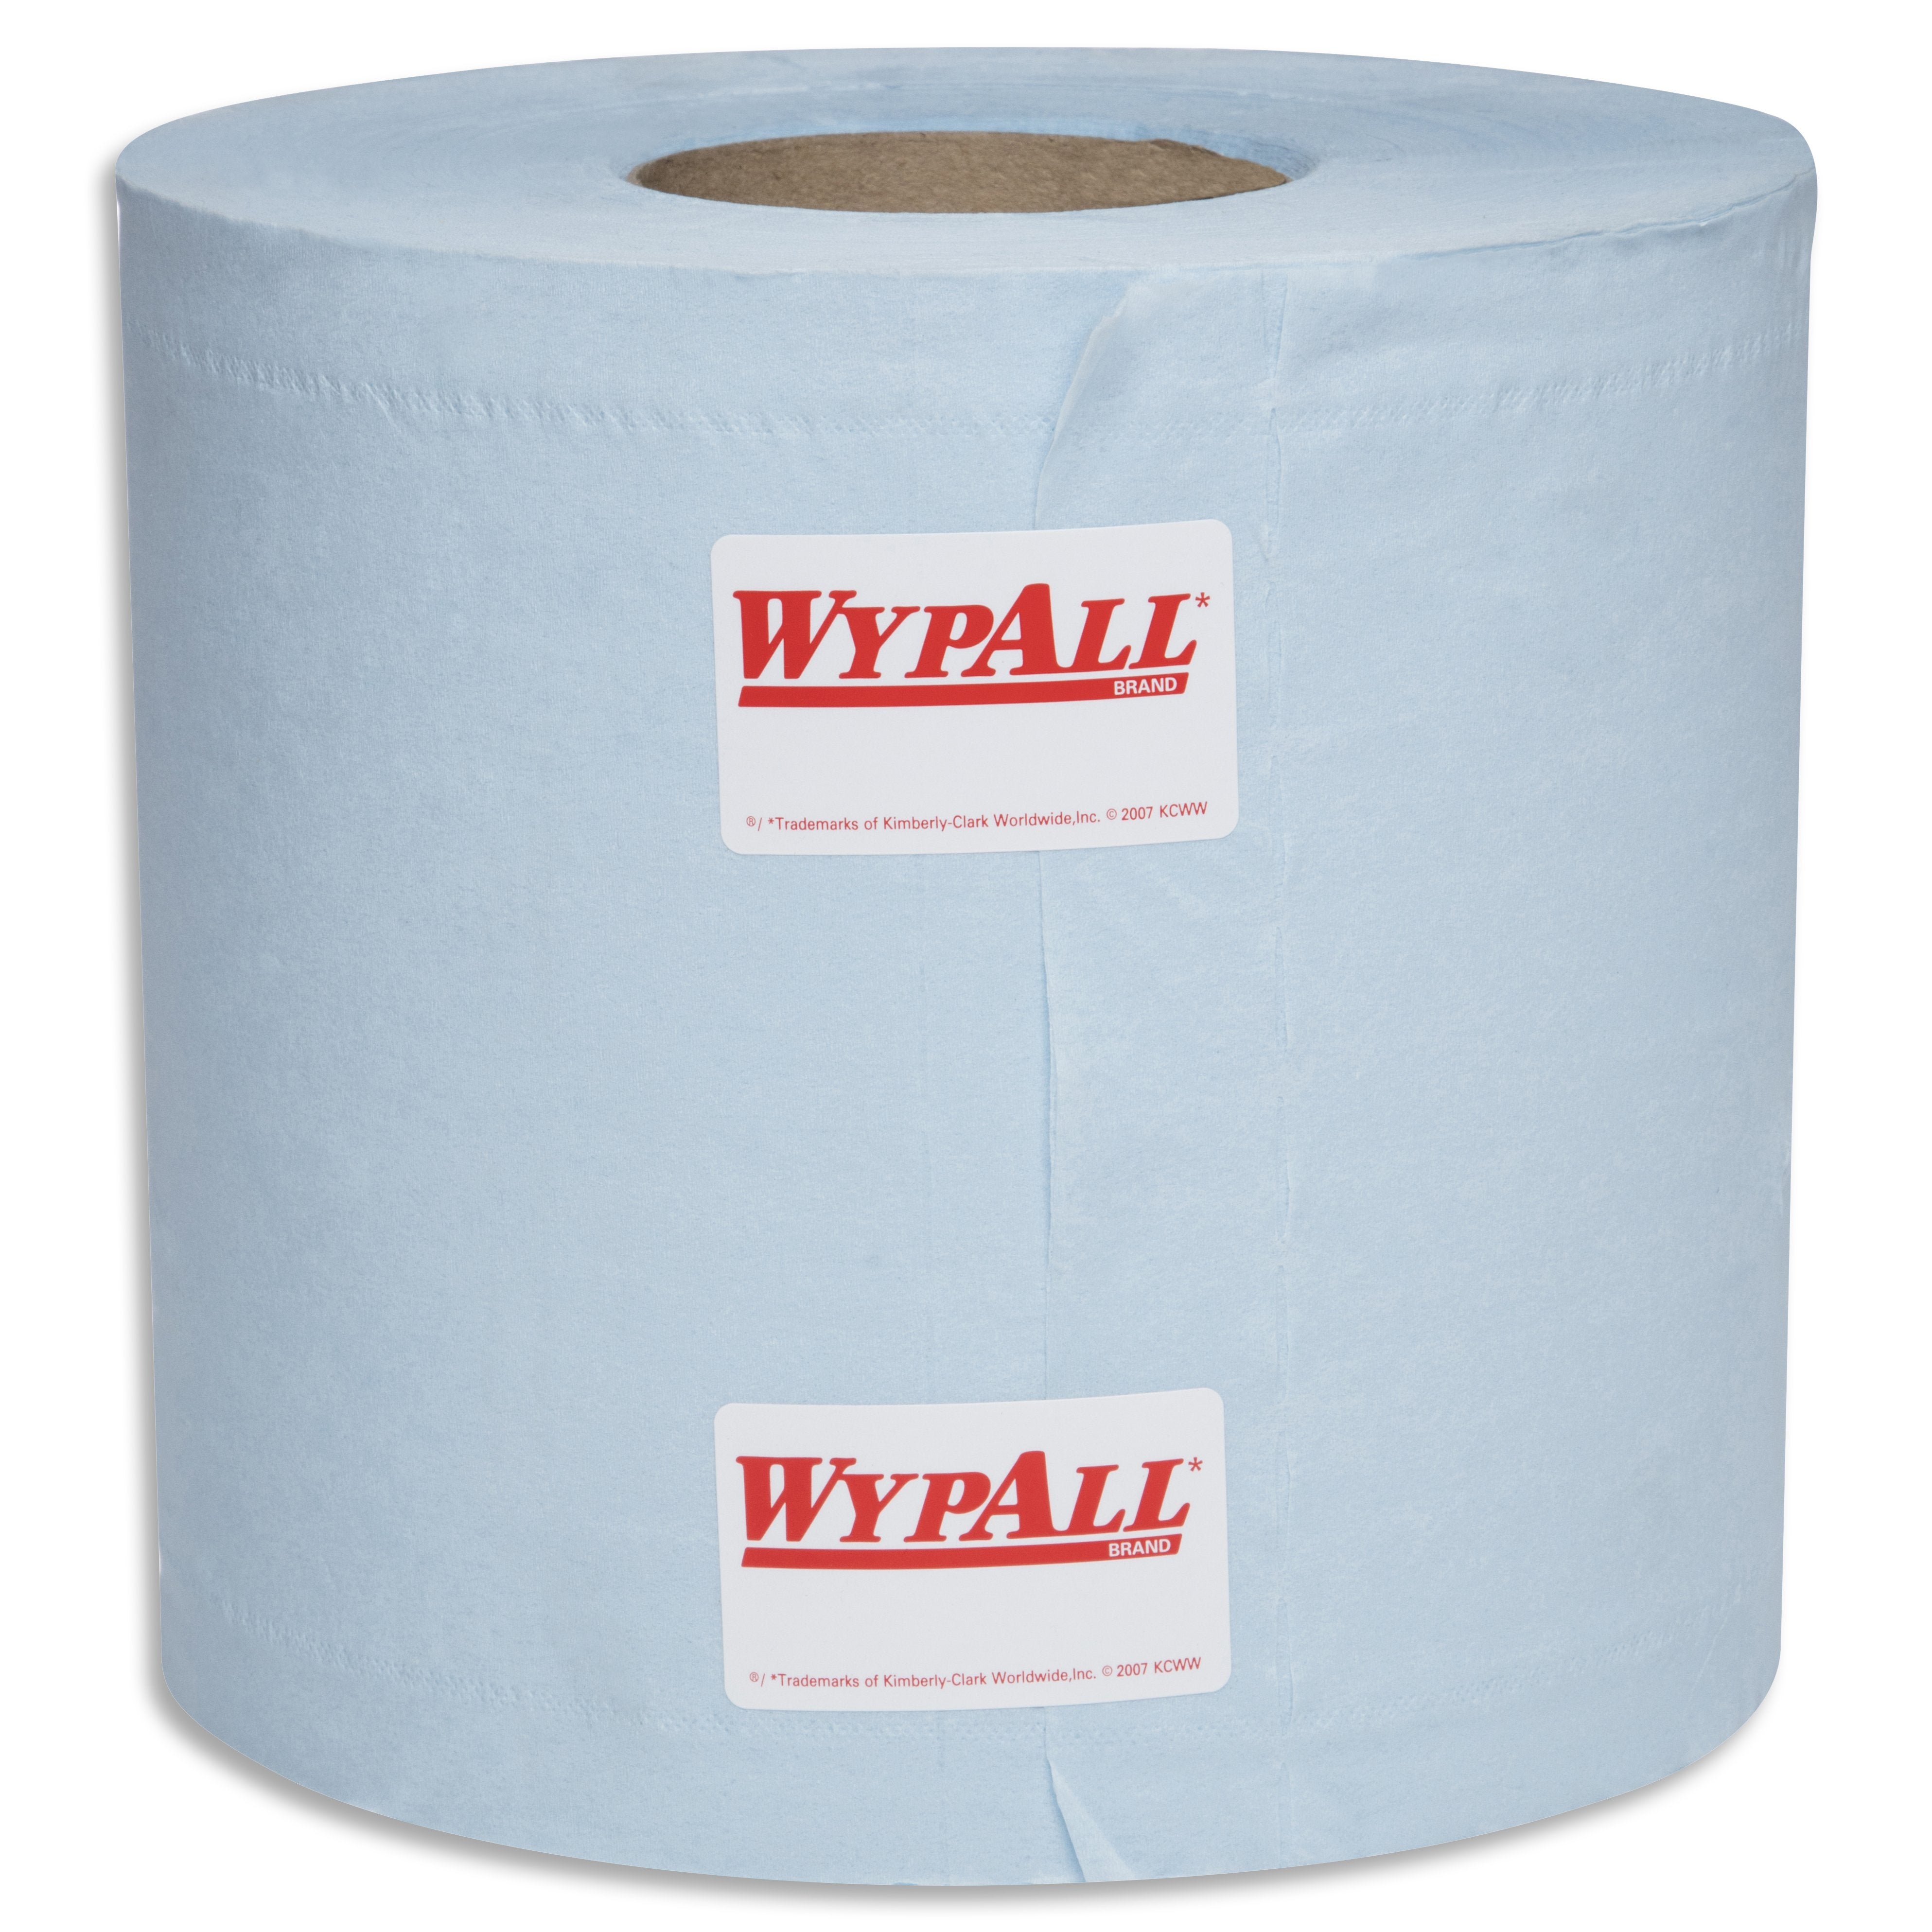 Kimberly-Clark Wypall Wiper Roll Control Centrefeed Blue - CT/4 Cleaning Supplies Carton of 4 